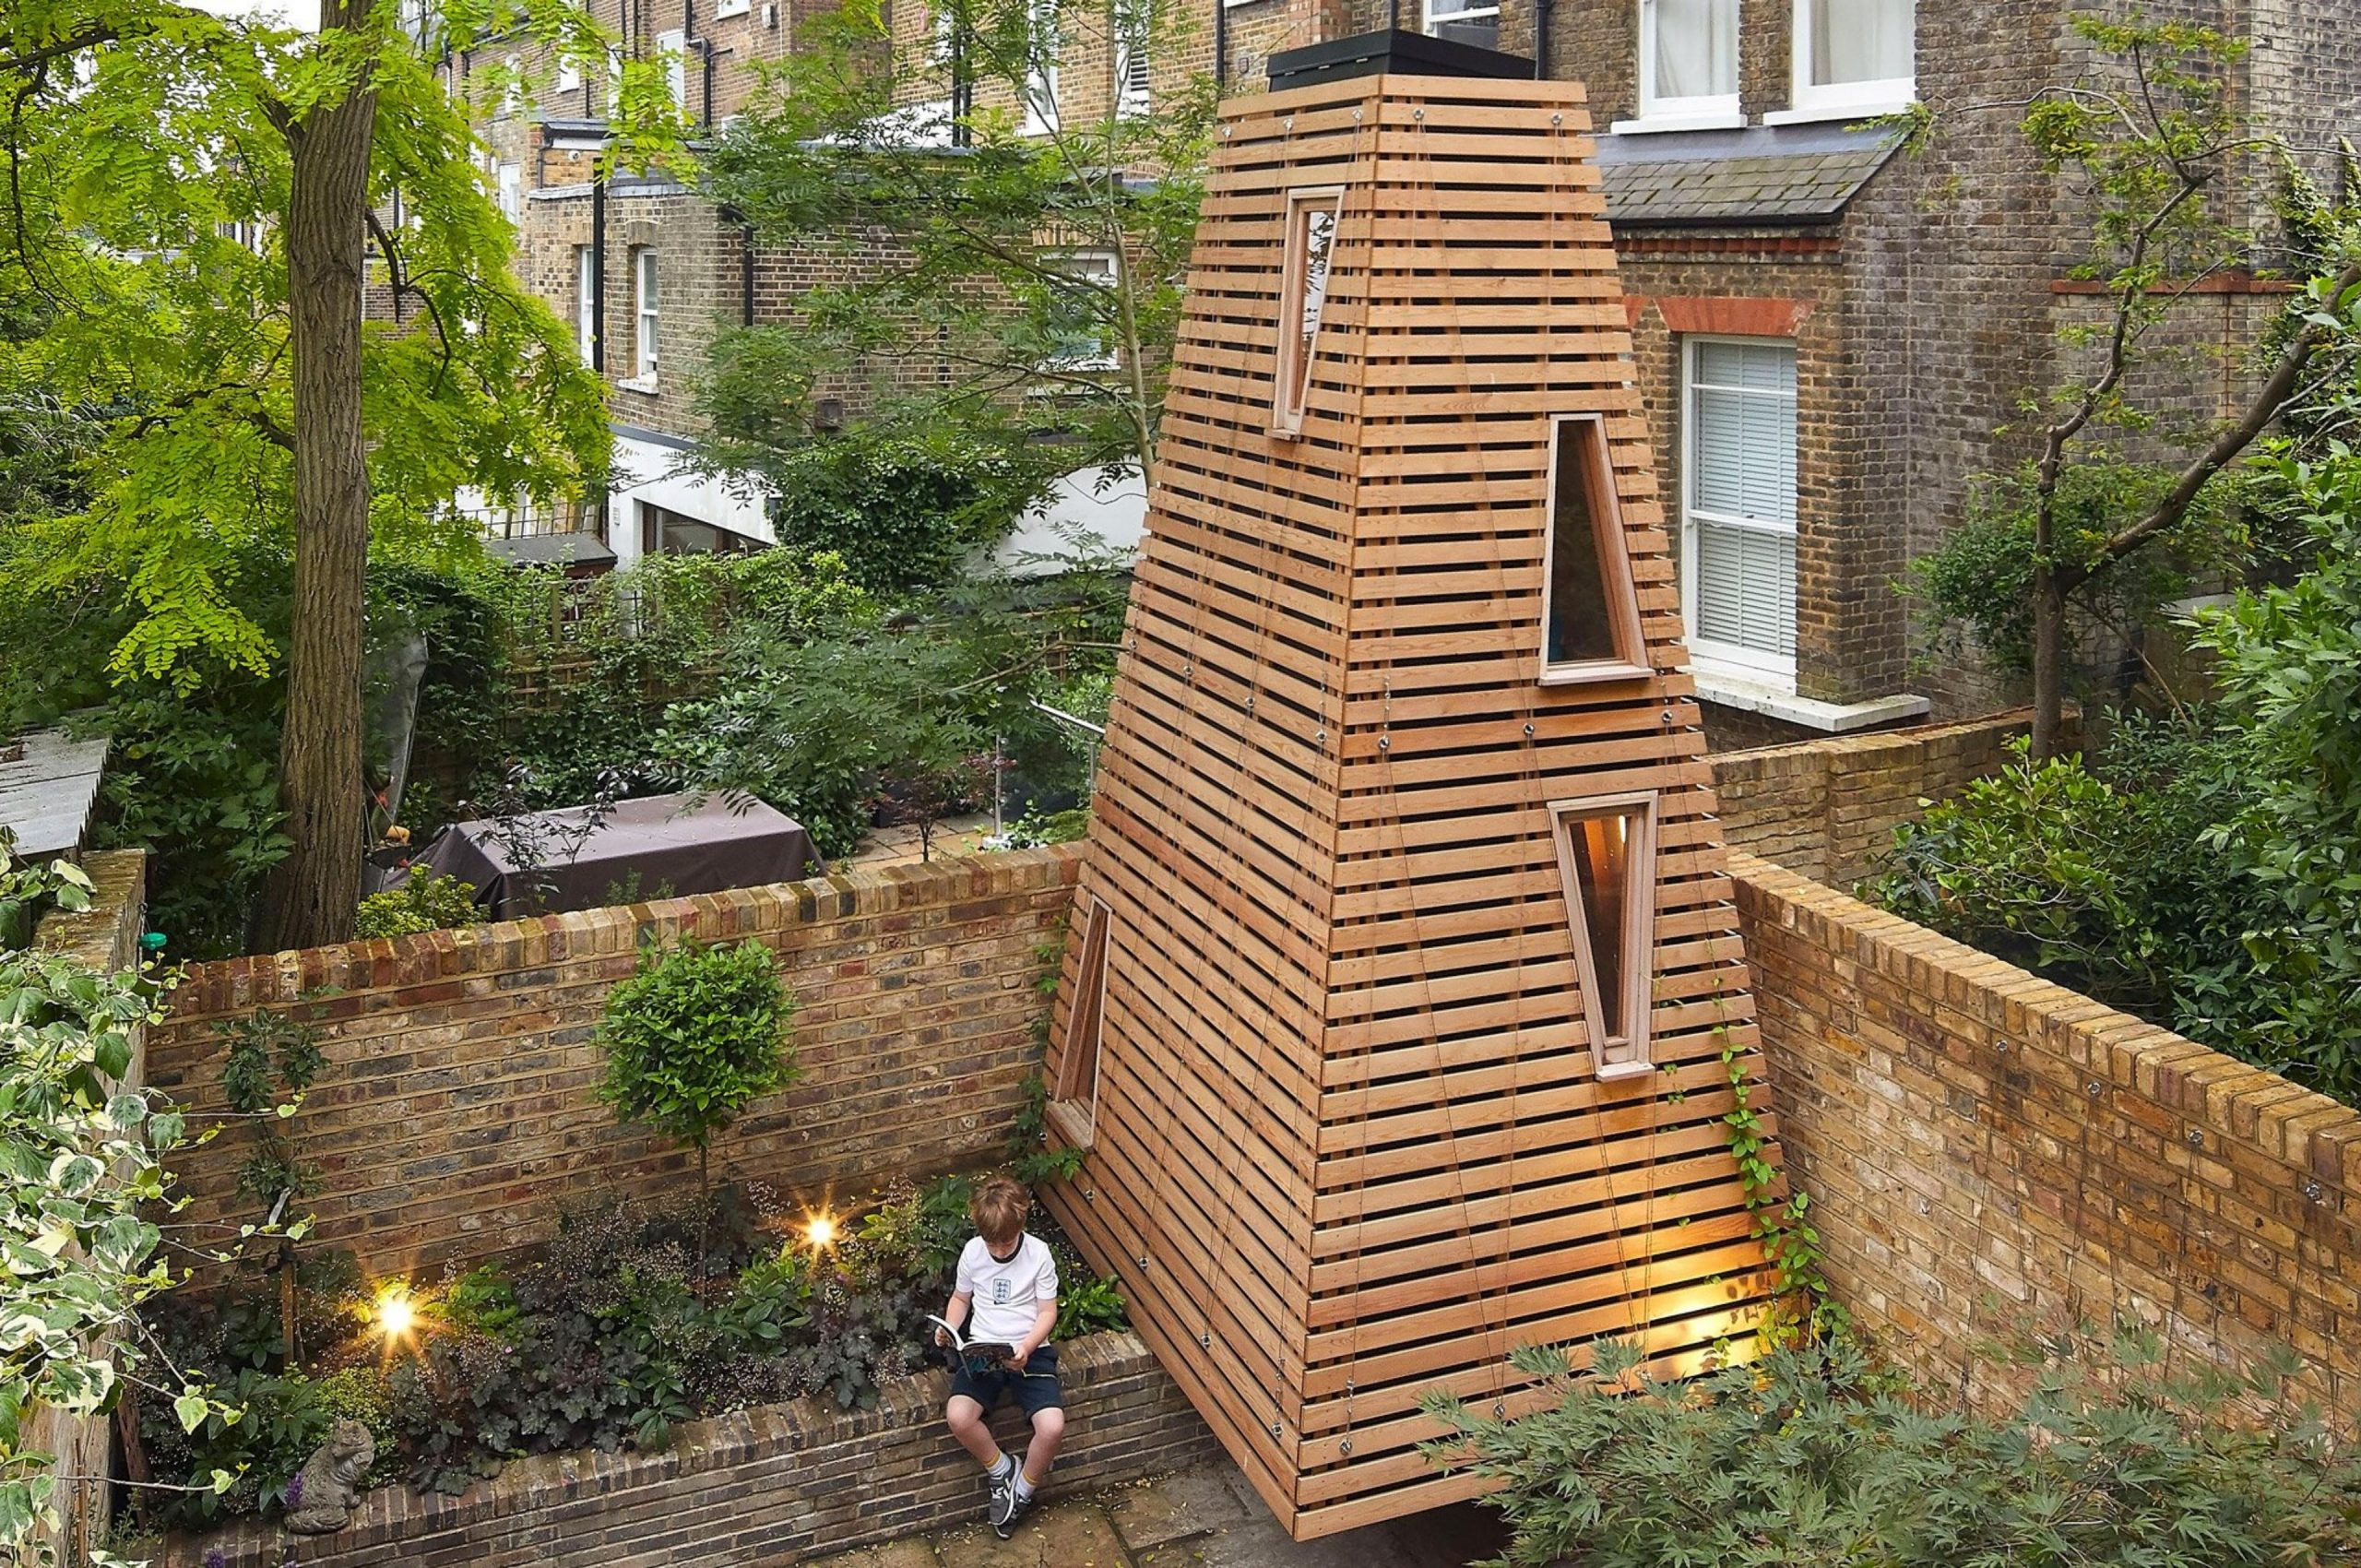 #Treeless treehouse “sprouts up” in London home’s garden